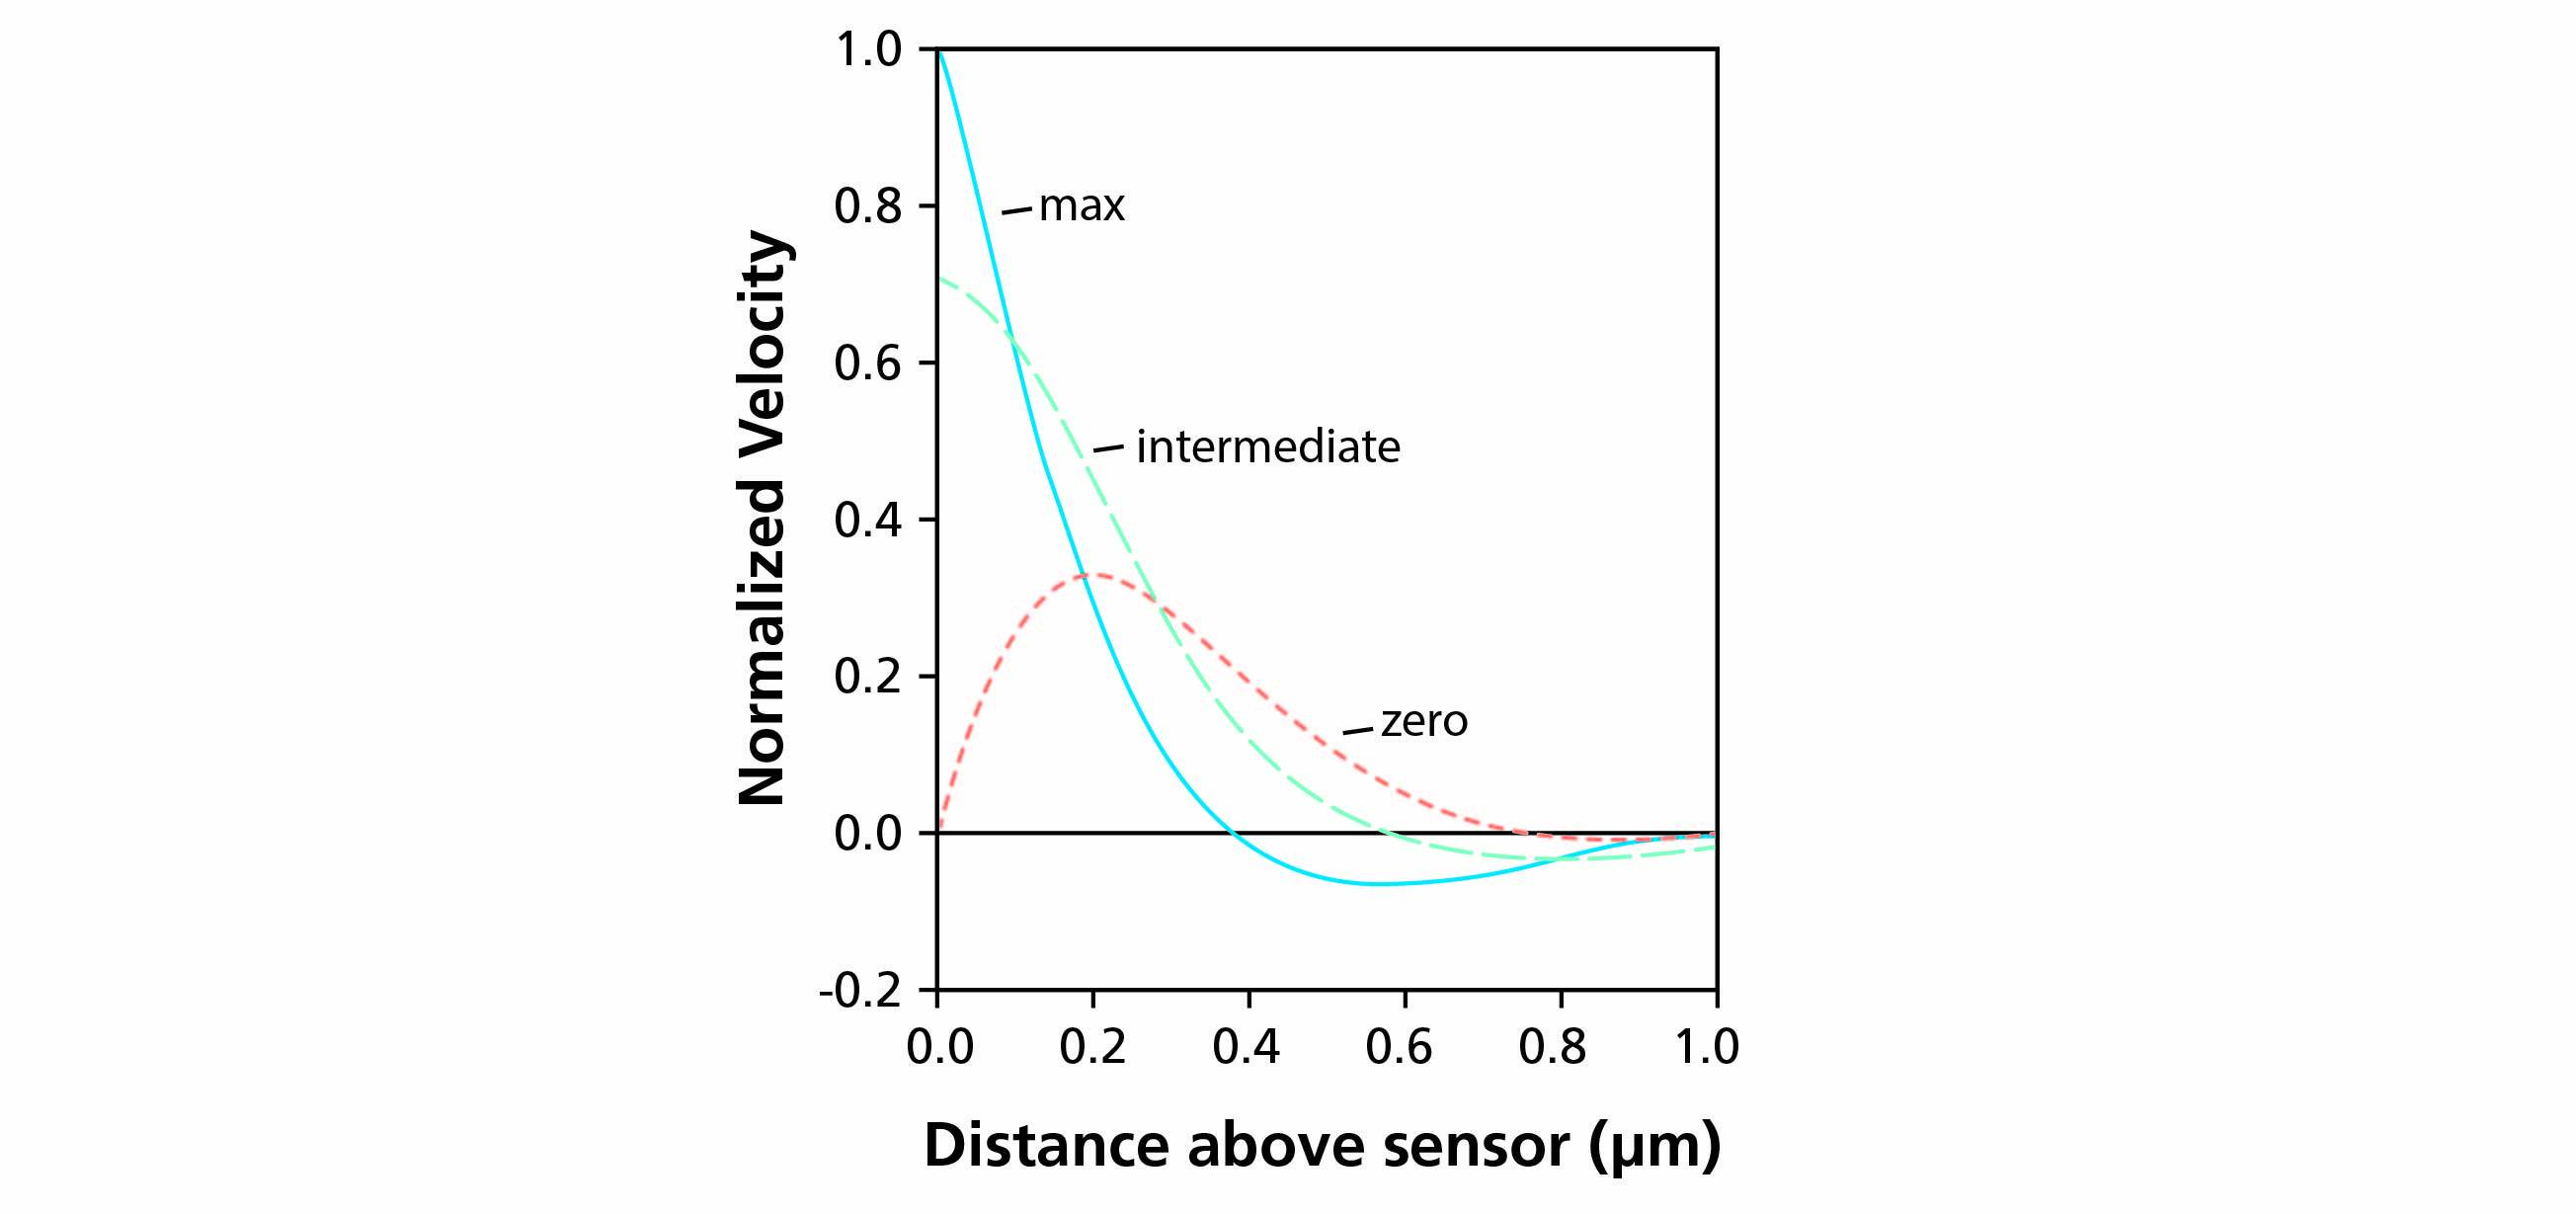 Sensing depth above QCM sensor at different points in time